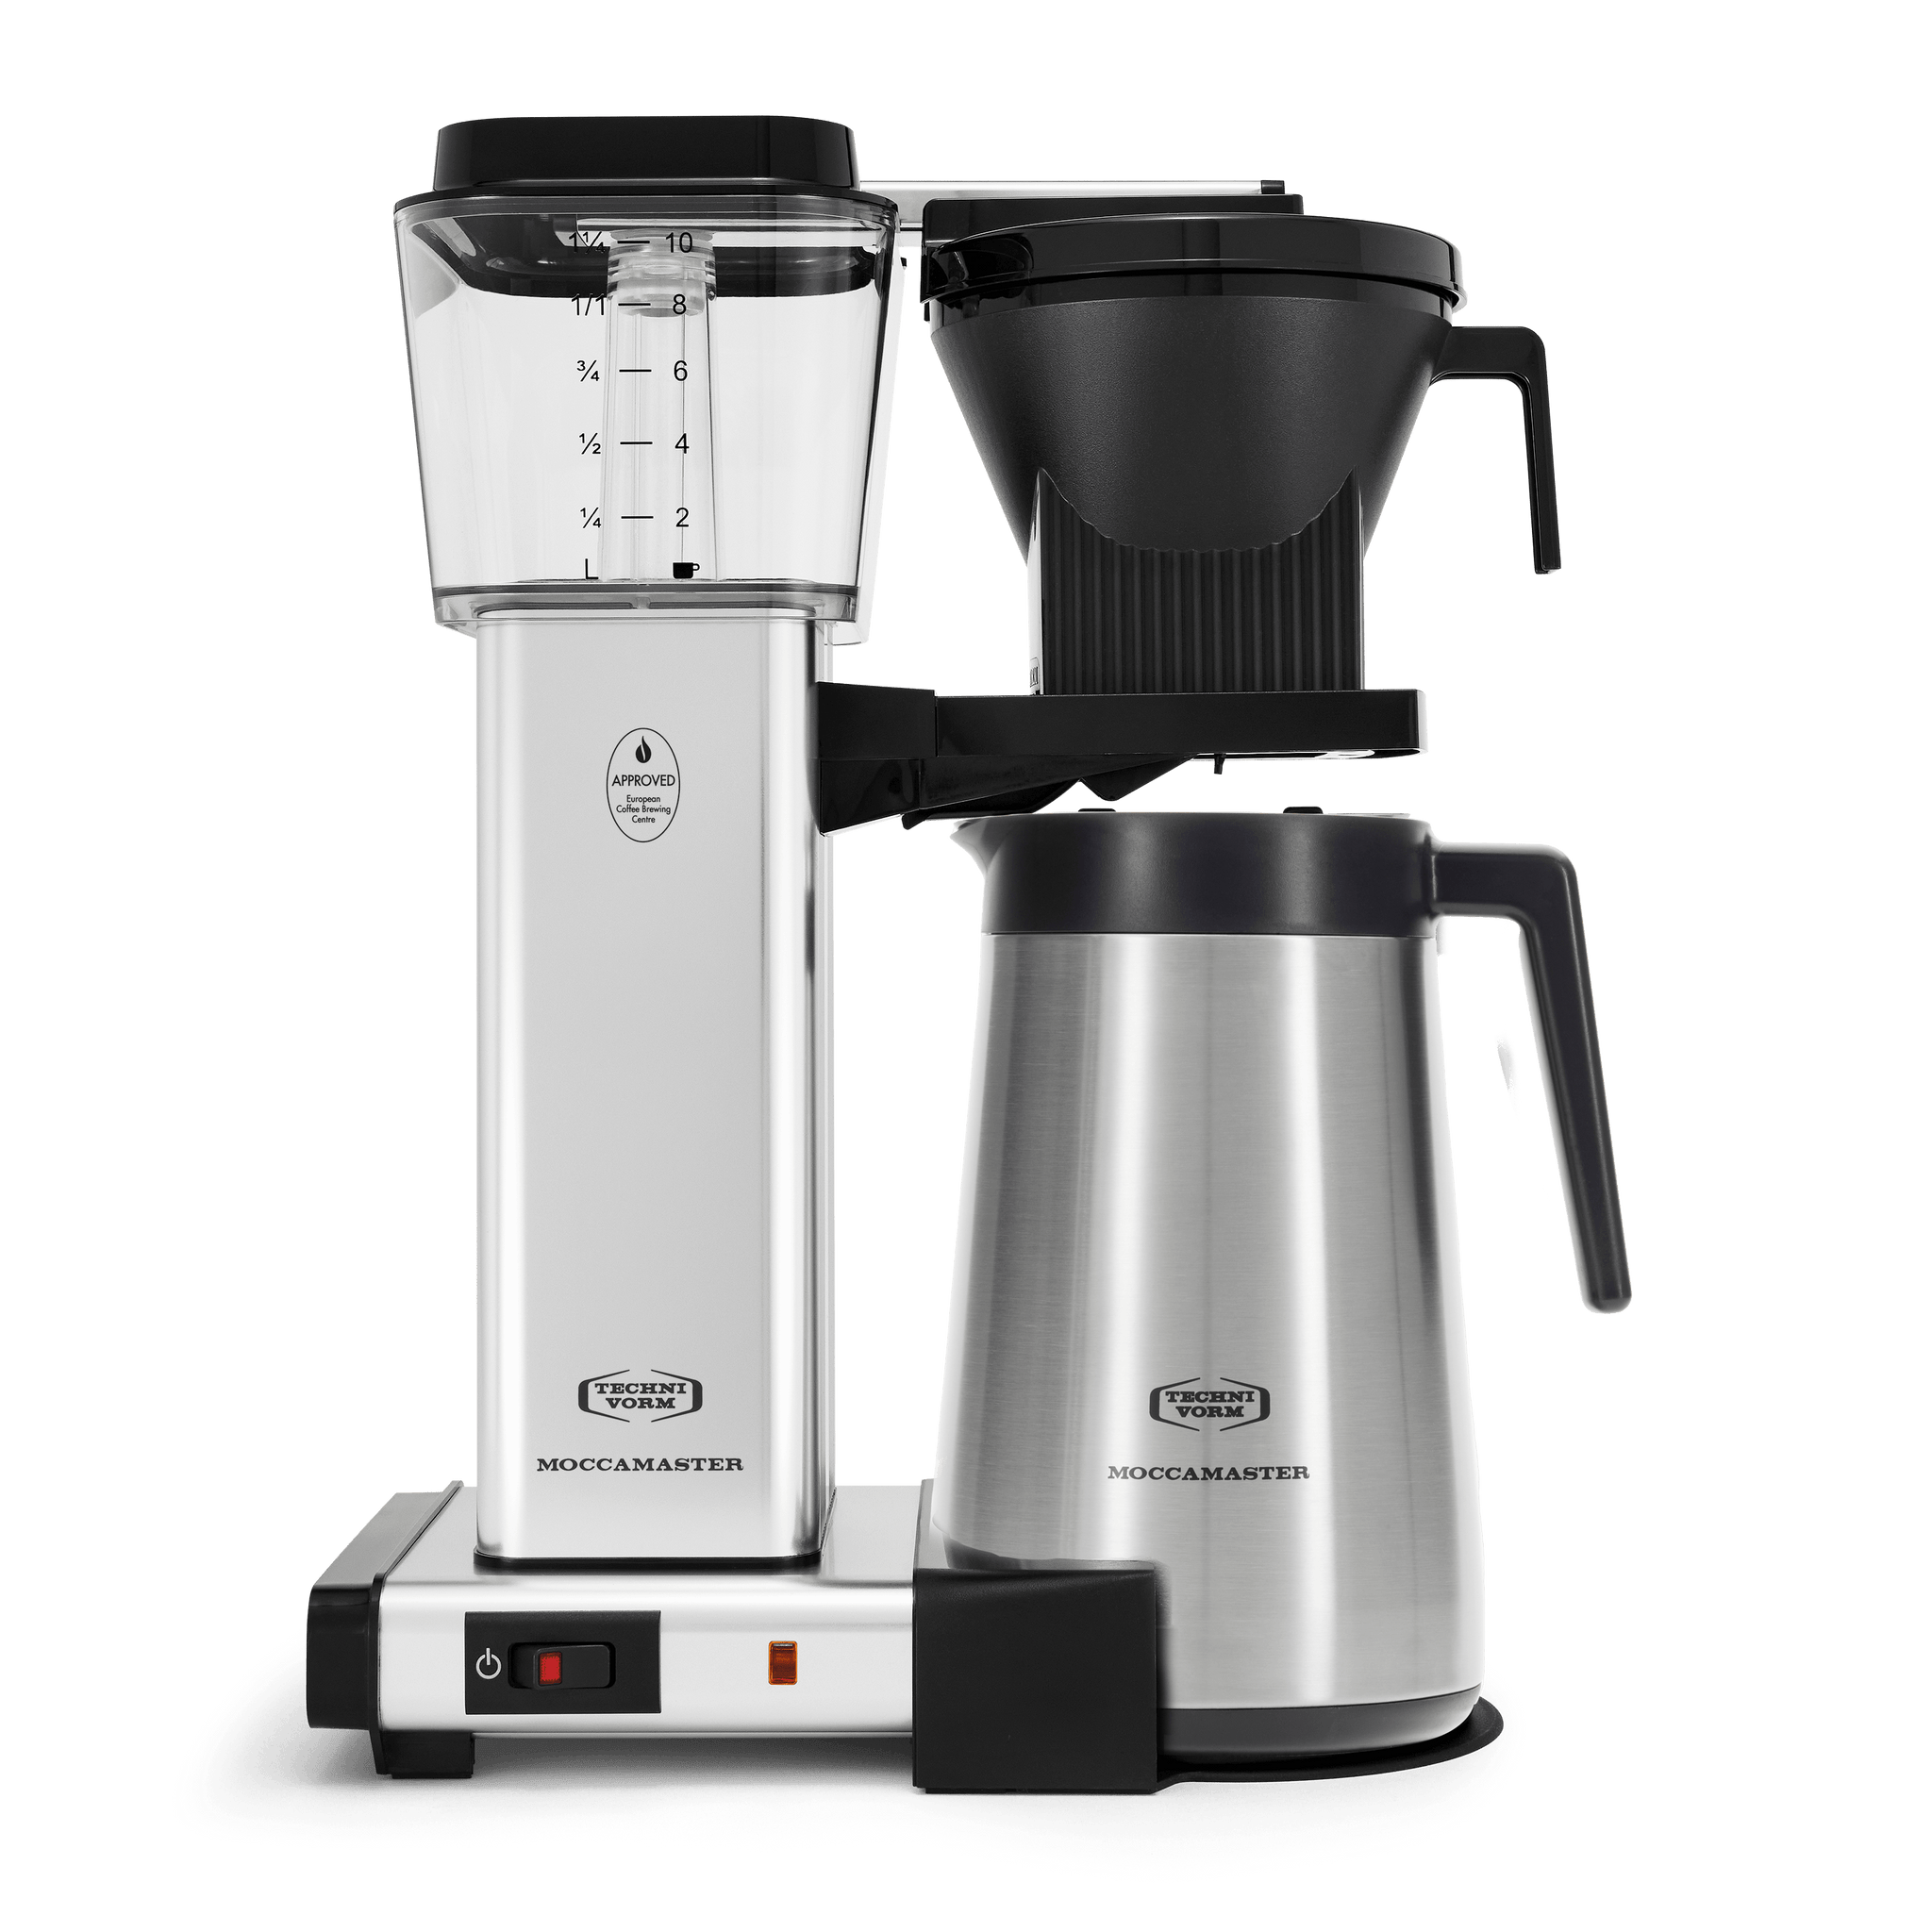 Over Automatic Drip-Stop Coffee Maker: Moccamaster KBGT Brewer | Moccamaster USA